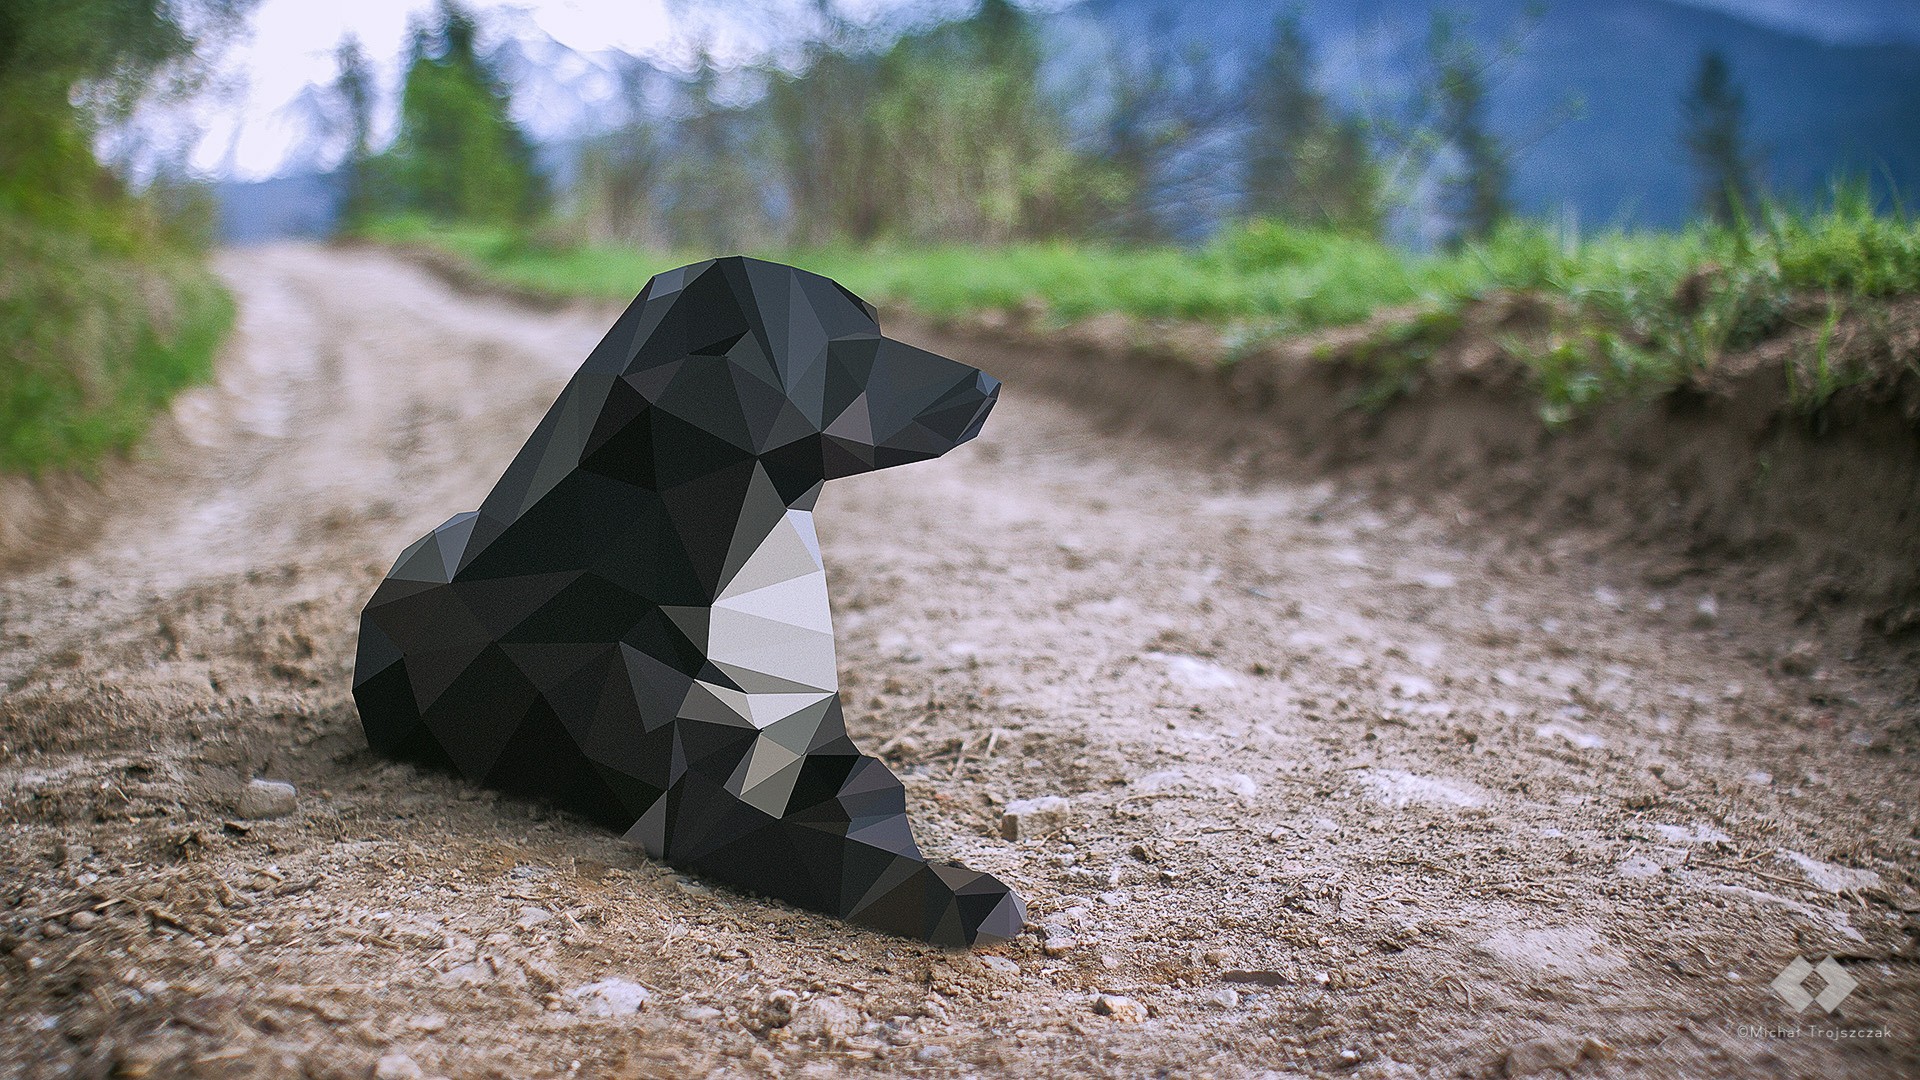 General 1920x1080 dog vector artwork low poly animals